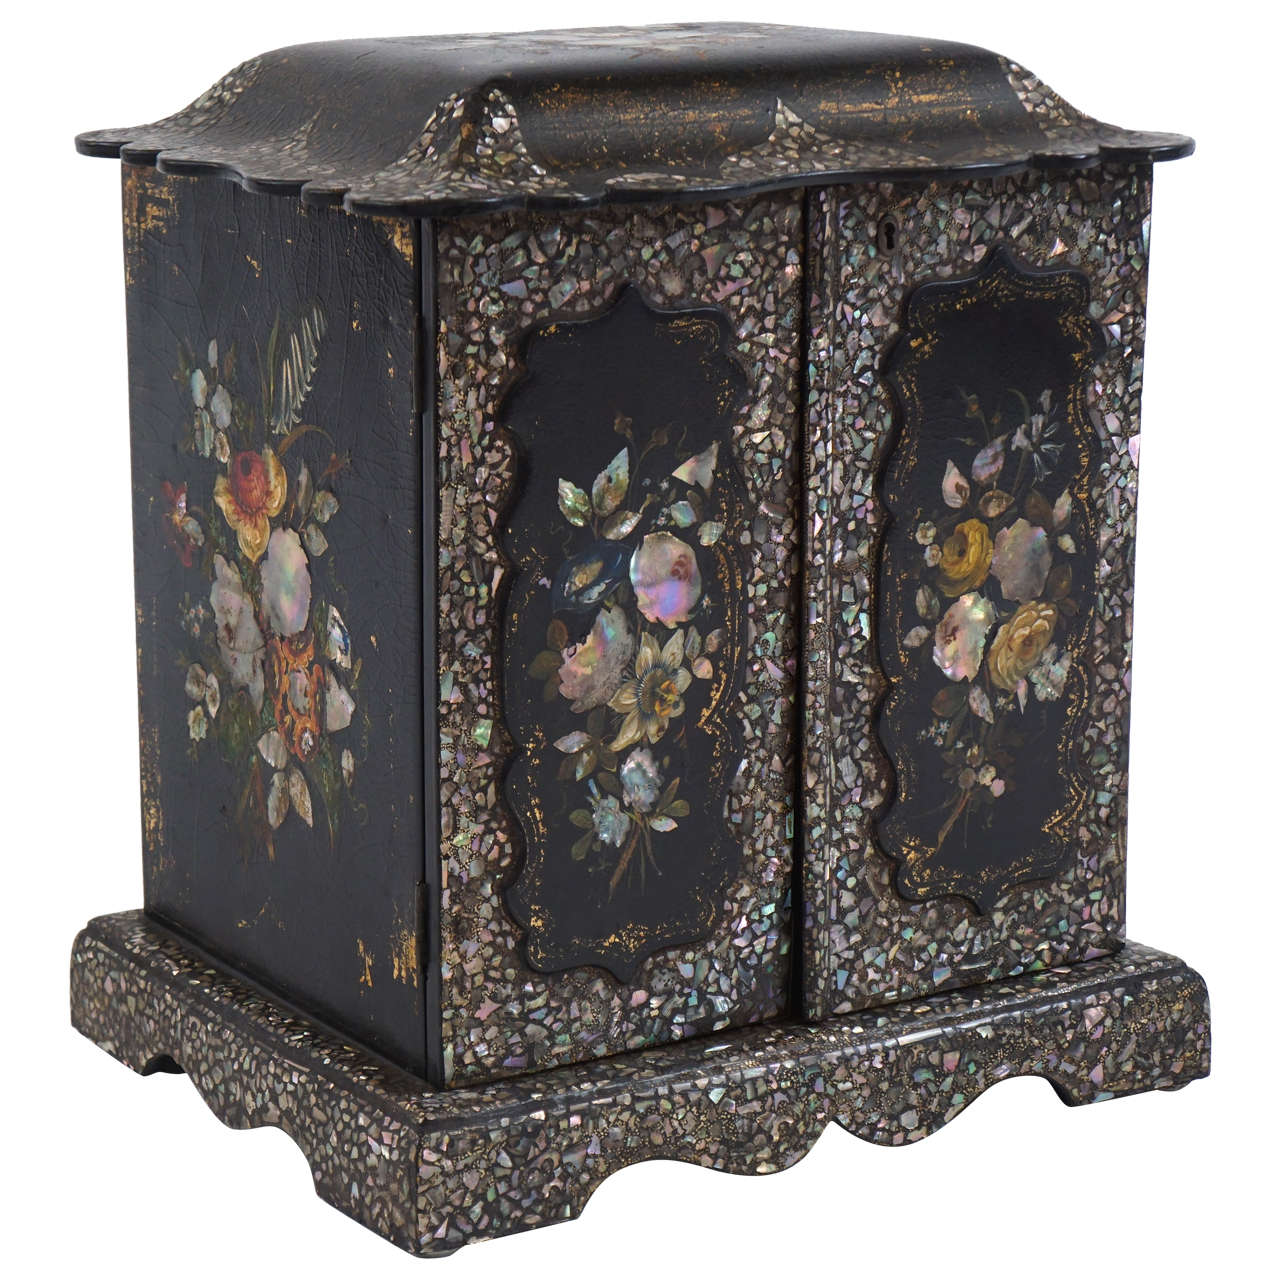 Papier-Ma�̂ché and Mother-of-Pearl Table Cabinet, England circa 1850